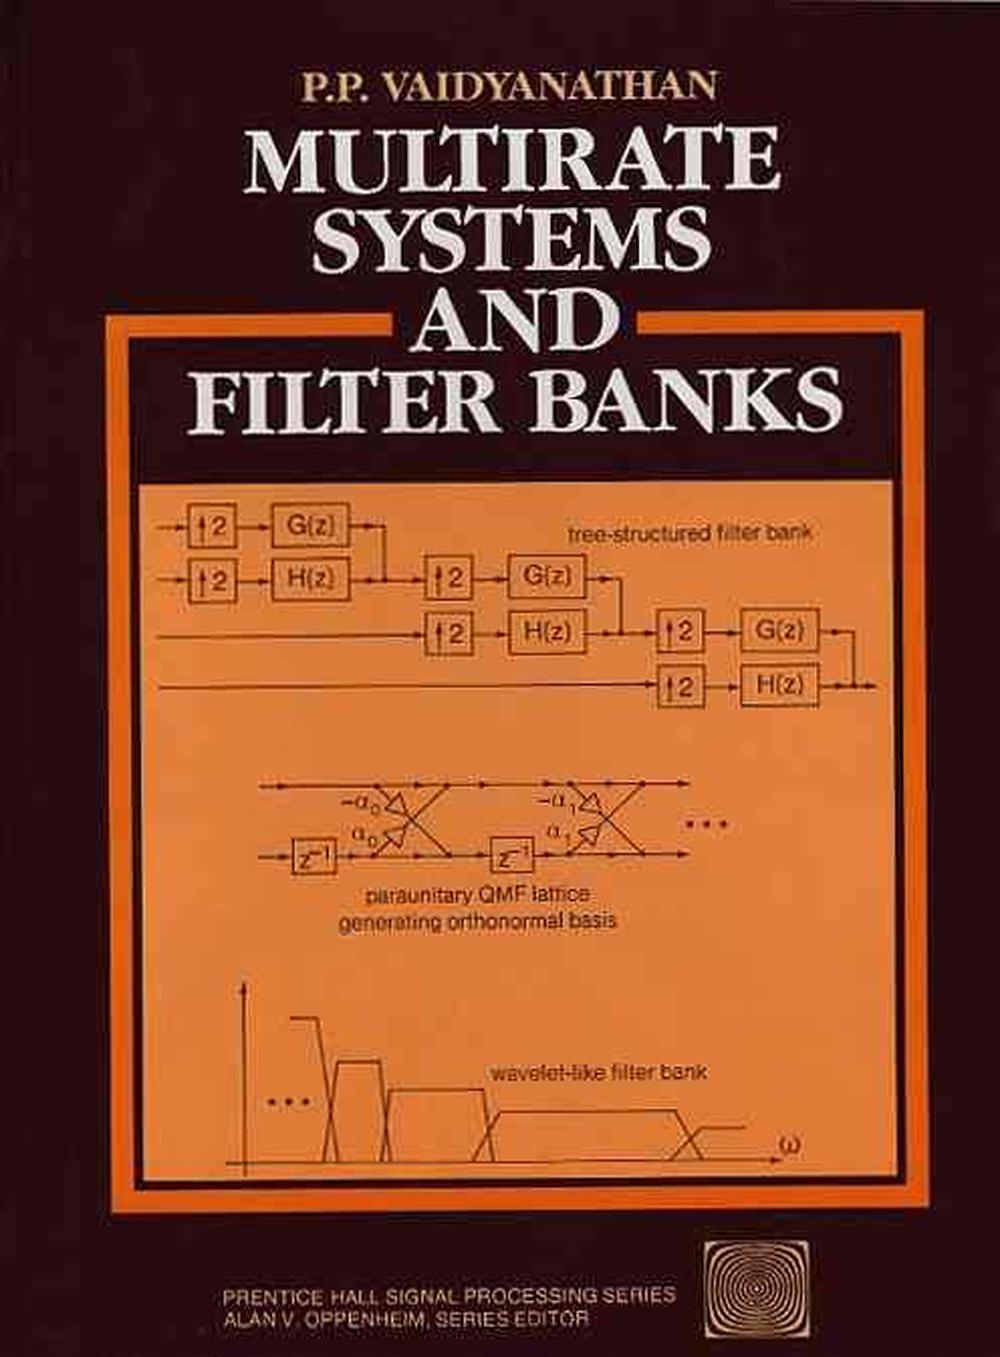 Multirate Systems and Filter Banks MULTIRATE SYS FILT _c by P.P. Vaidyanathan ( 9780136057185